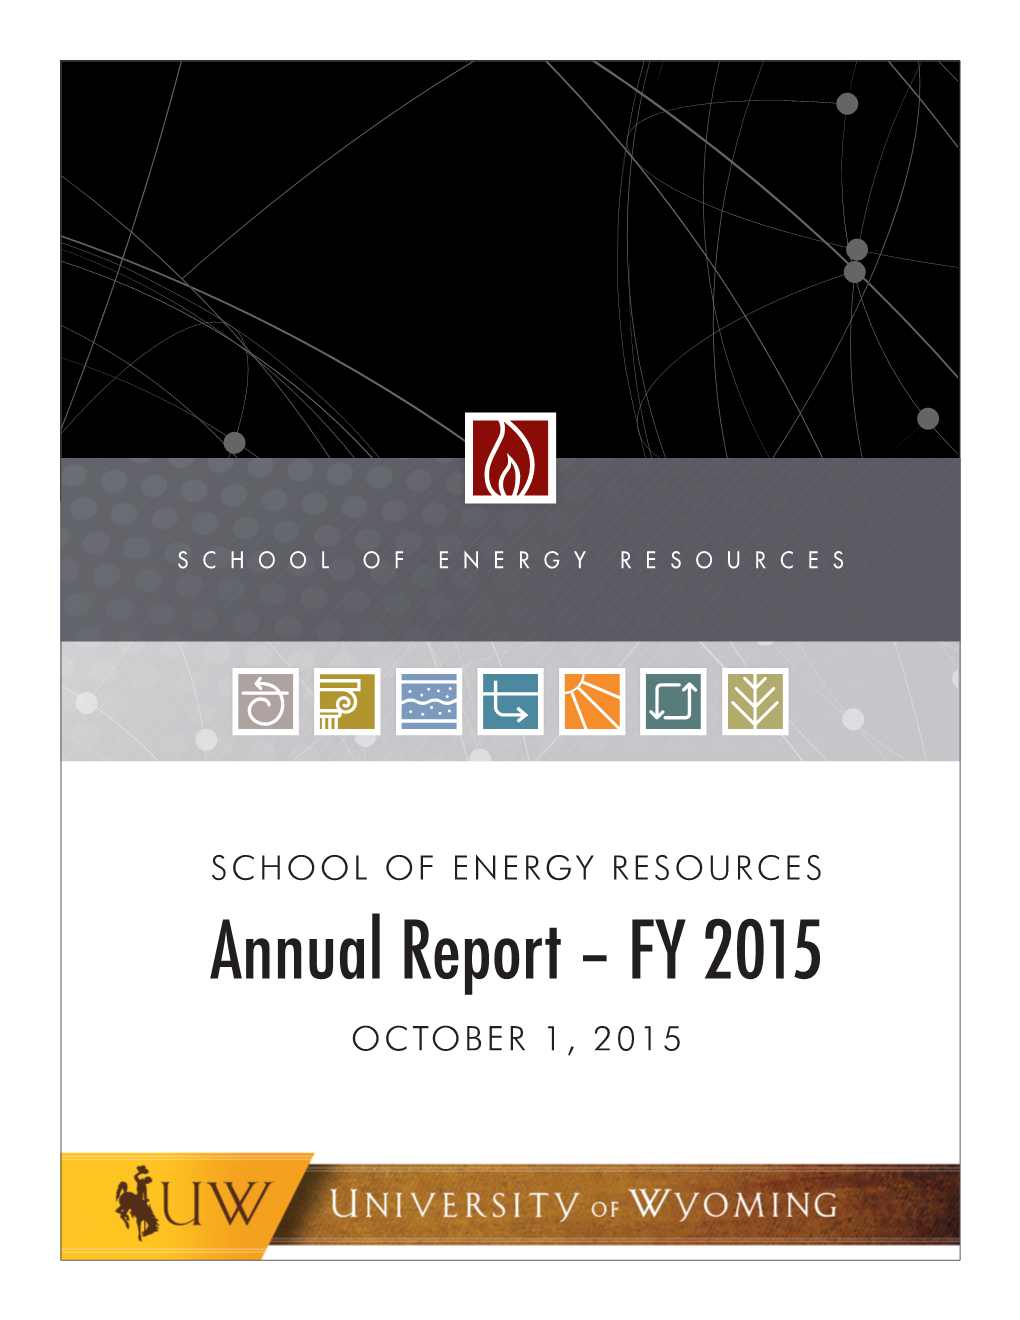 Annual Report – FY 2015 OCTOBER 1, 2015 the UNIVERSITY of WYOMING SCHOOL of ENERGY RESOURCES ANNUAL REPORT FY 15